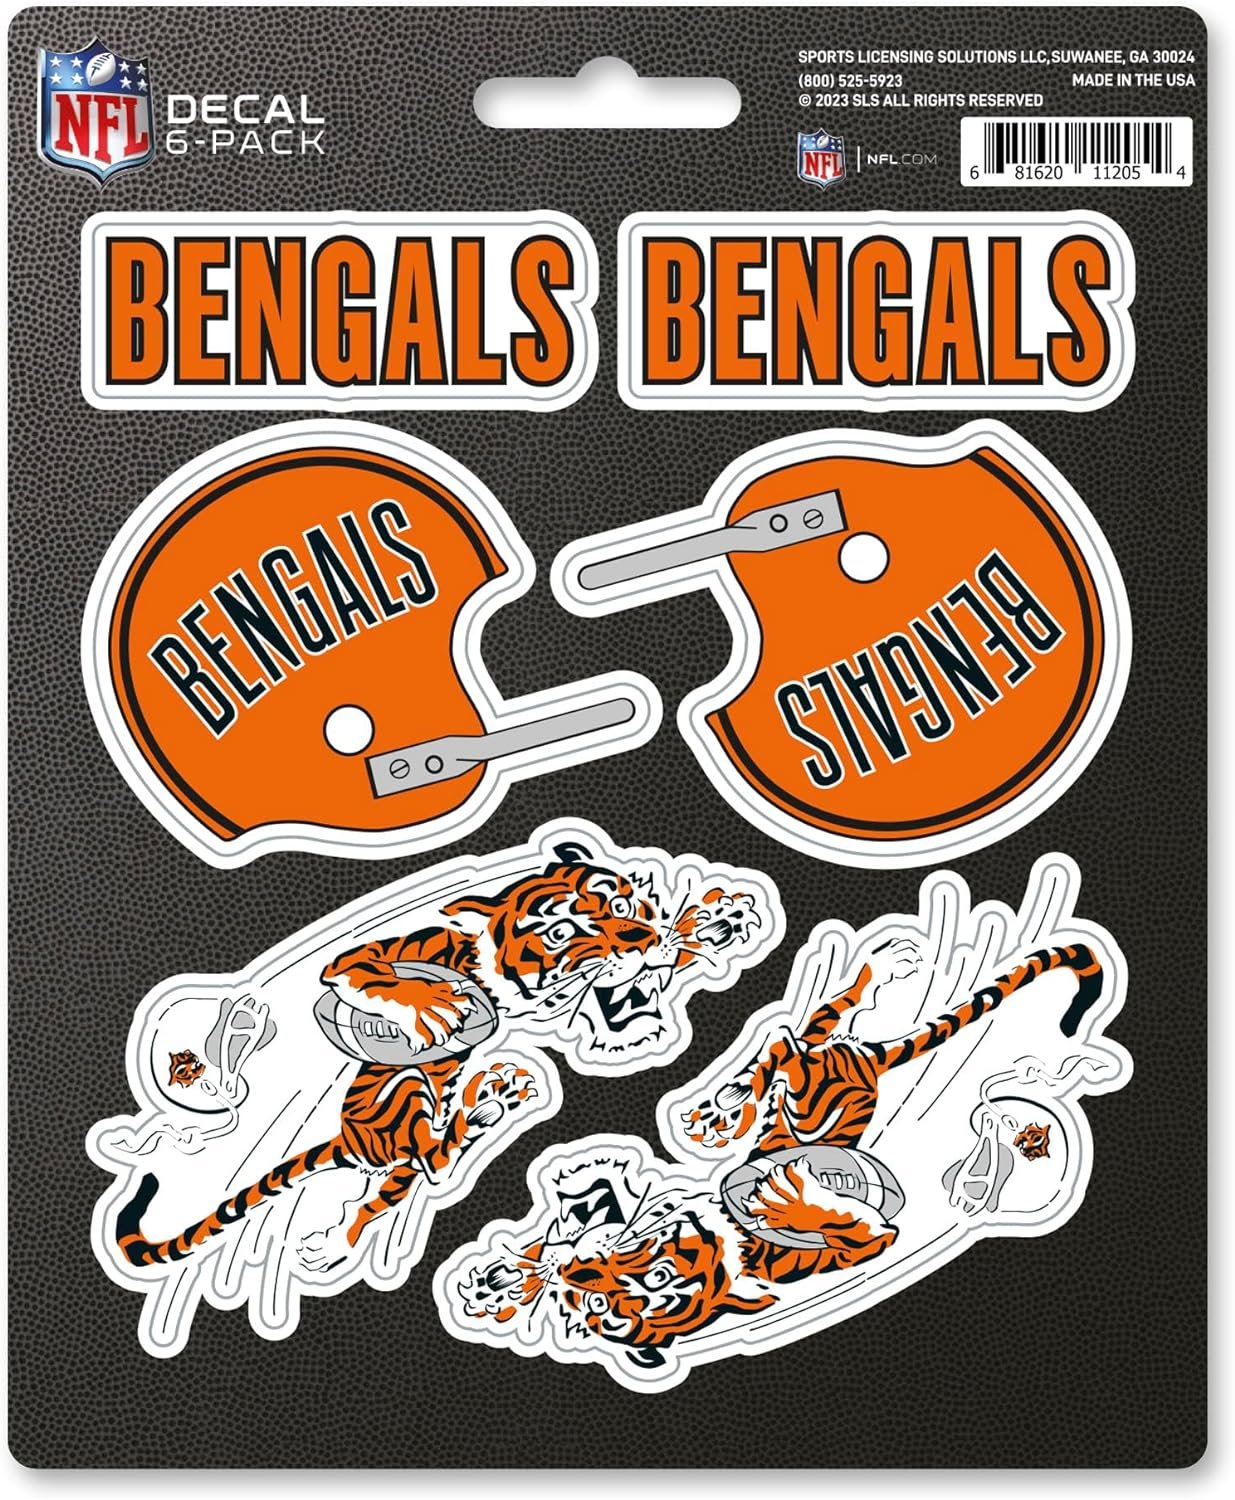 Cincinnati Bengals 6-Piece Decal Sticker Set, Vintage Retro Logo, 5x6 Inch Sheet, Gift for football fans for any hard surfaces around home, automotive, personal items